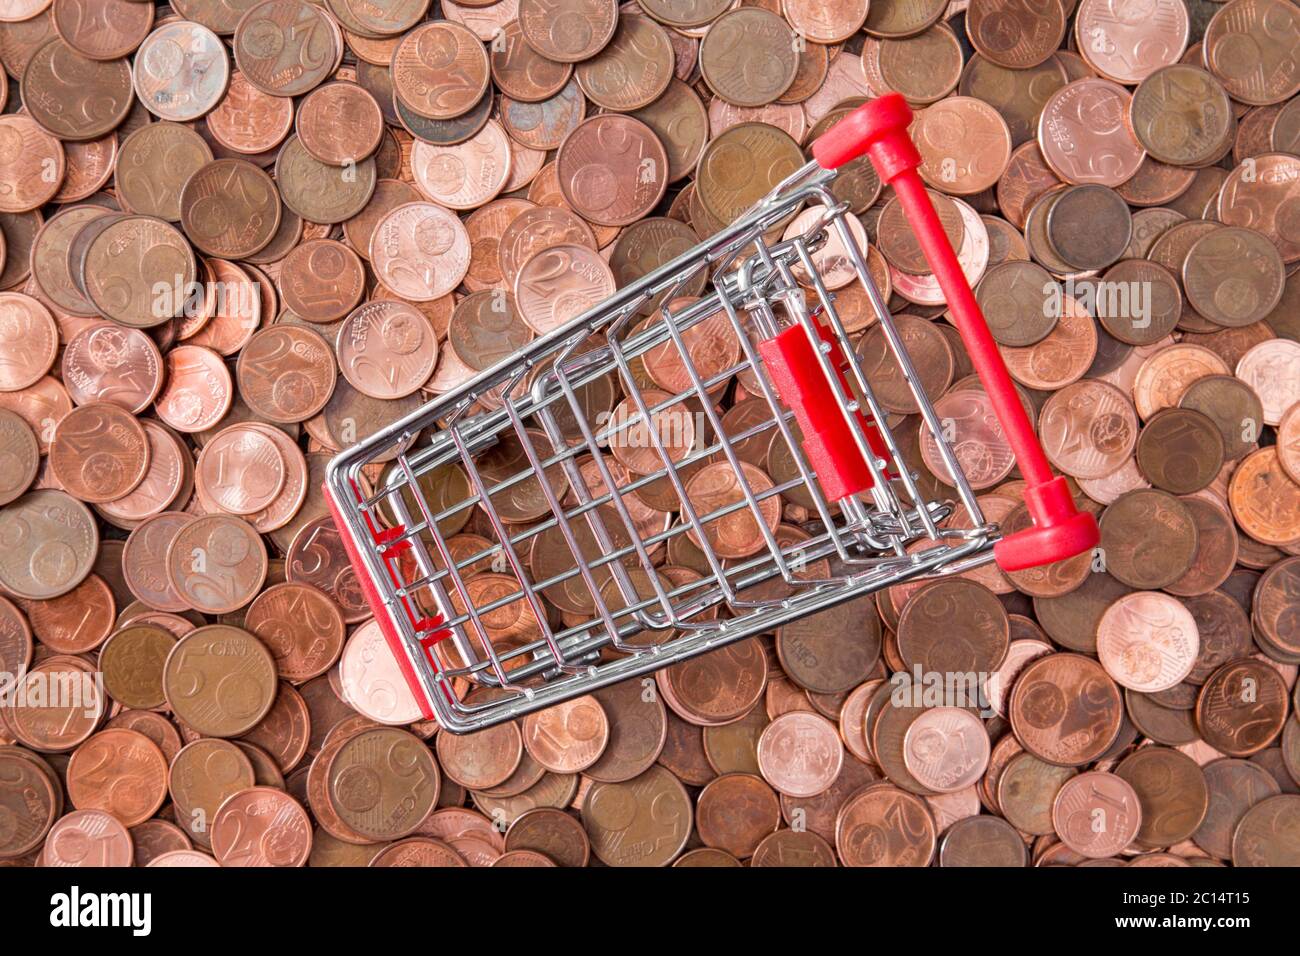 Euro cent coins and empty shopping cart Stock Photo